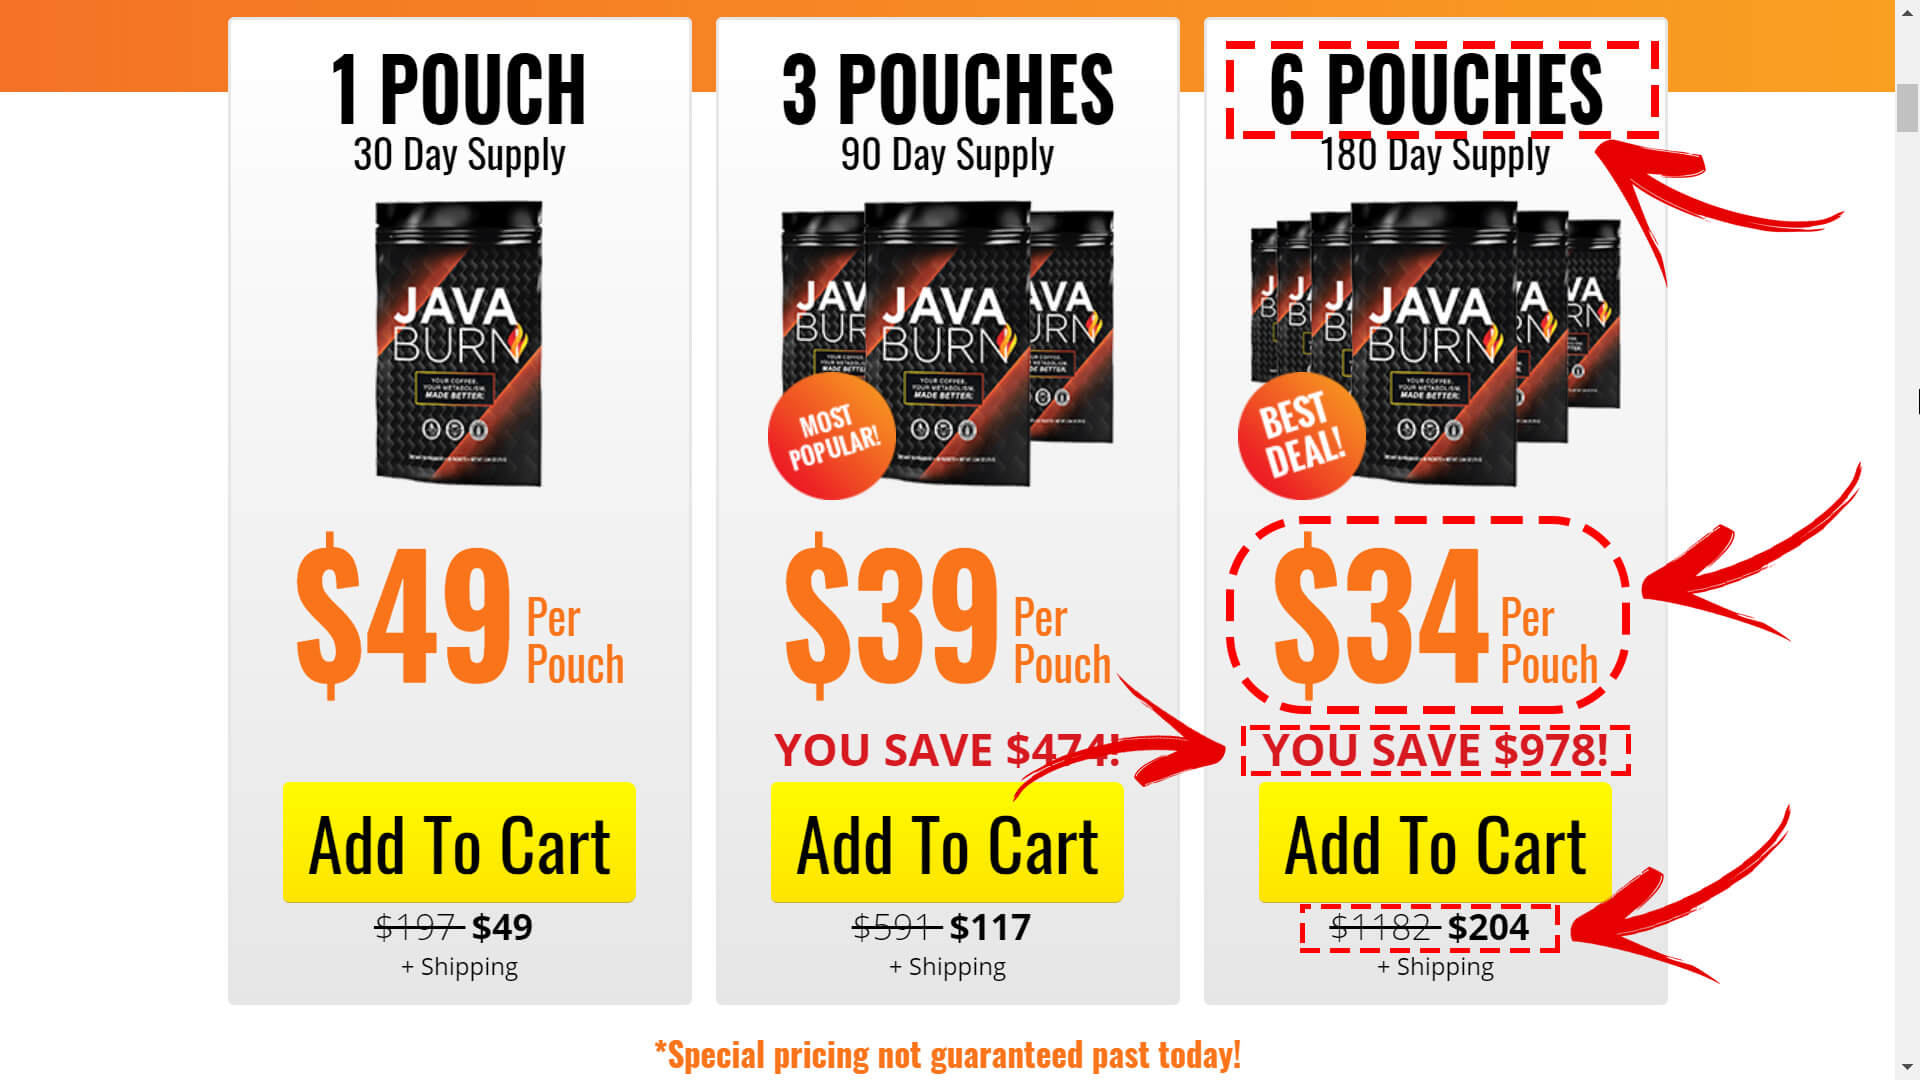 How to buy the official Java Burn packets - Step 2